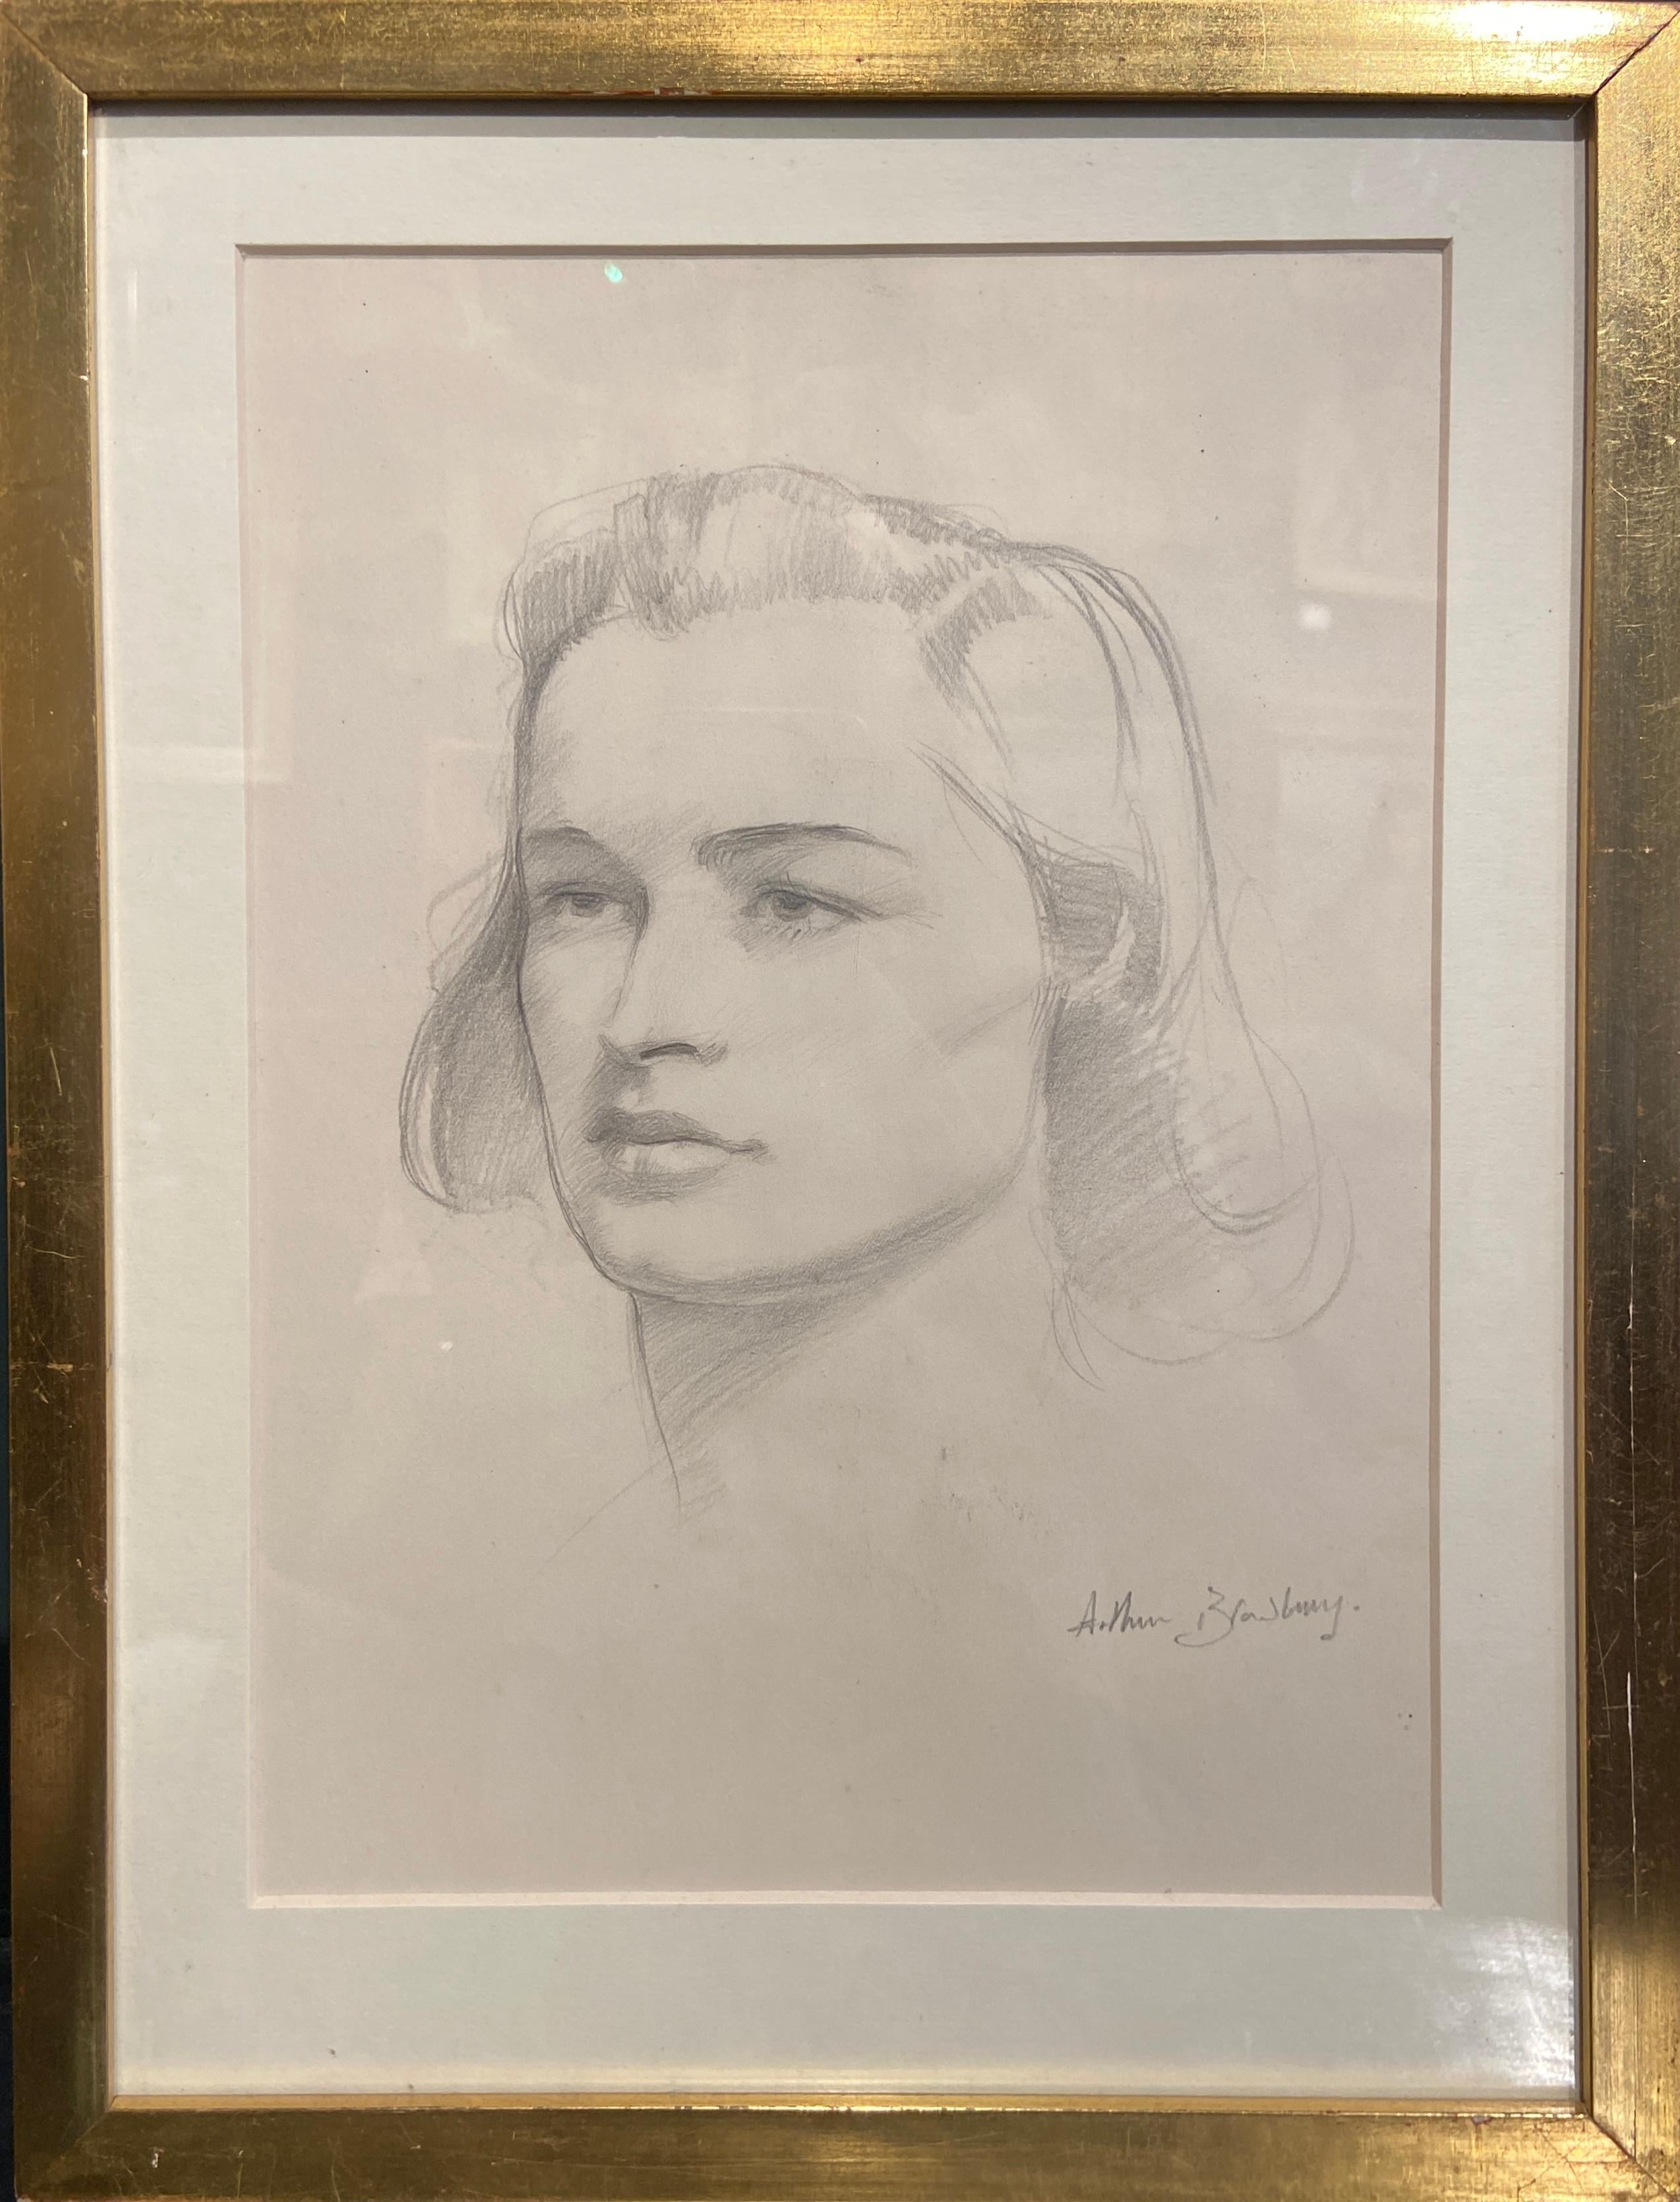 Graphite on paper, signed bottom right
Entitled and dated 'Nov 1942' verso
Image size: 7 x 10 inches (17.75 x 25.5 cm)
Period gilt frame

This is a delicate portrait of Brigitte Kelly, a British dancer who danced with the Covent Garden Russian